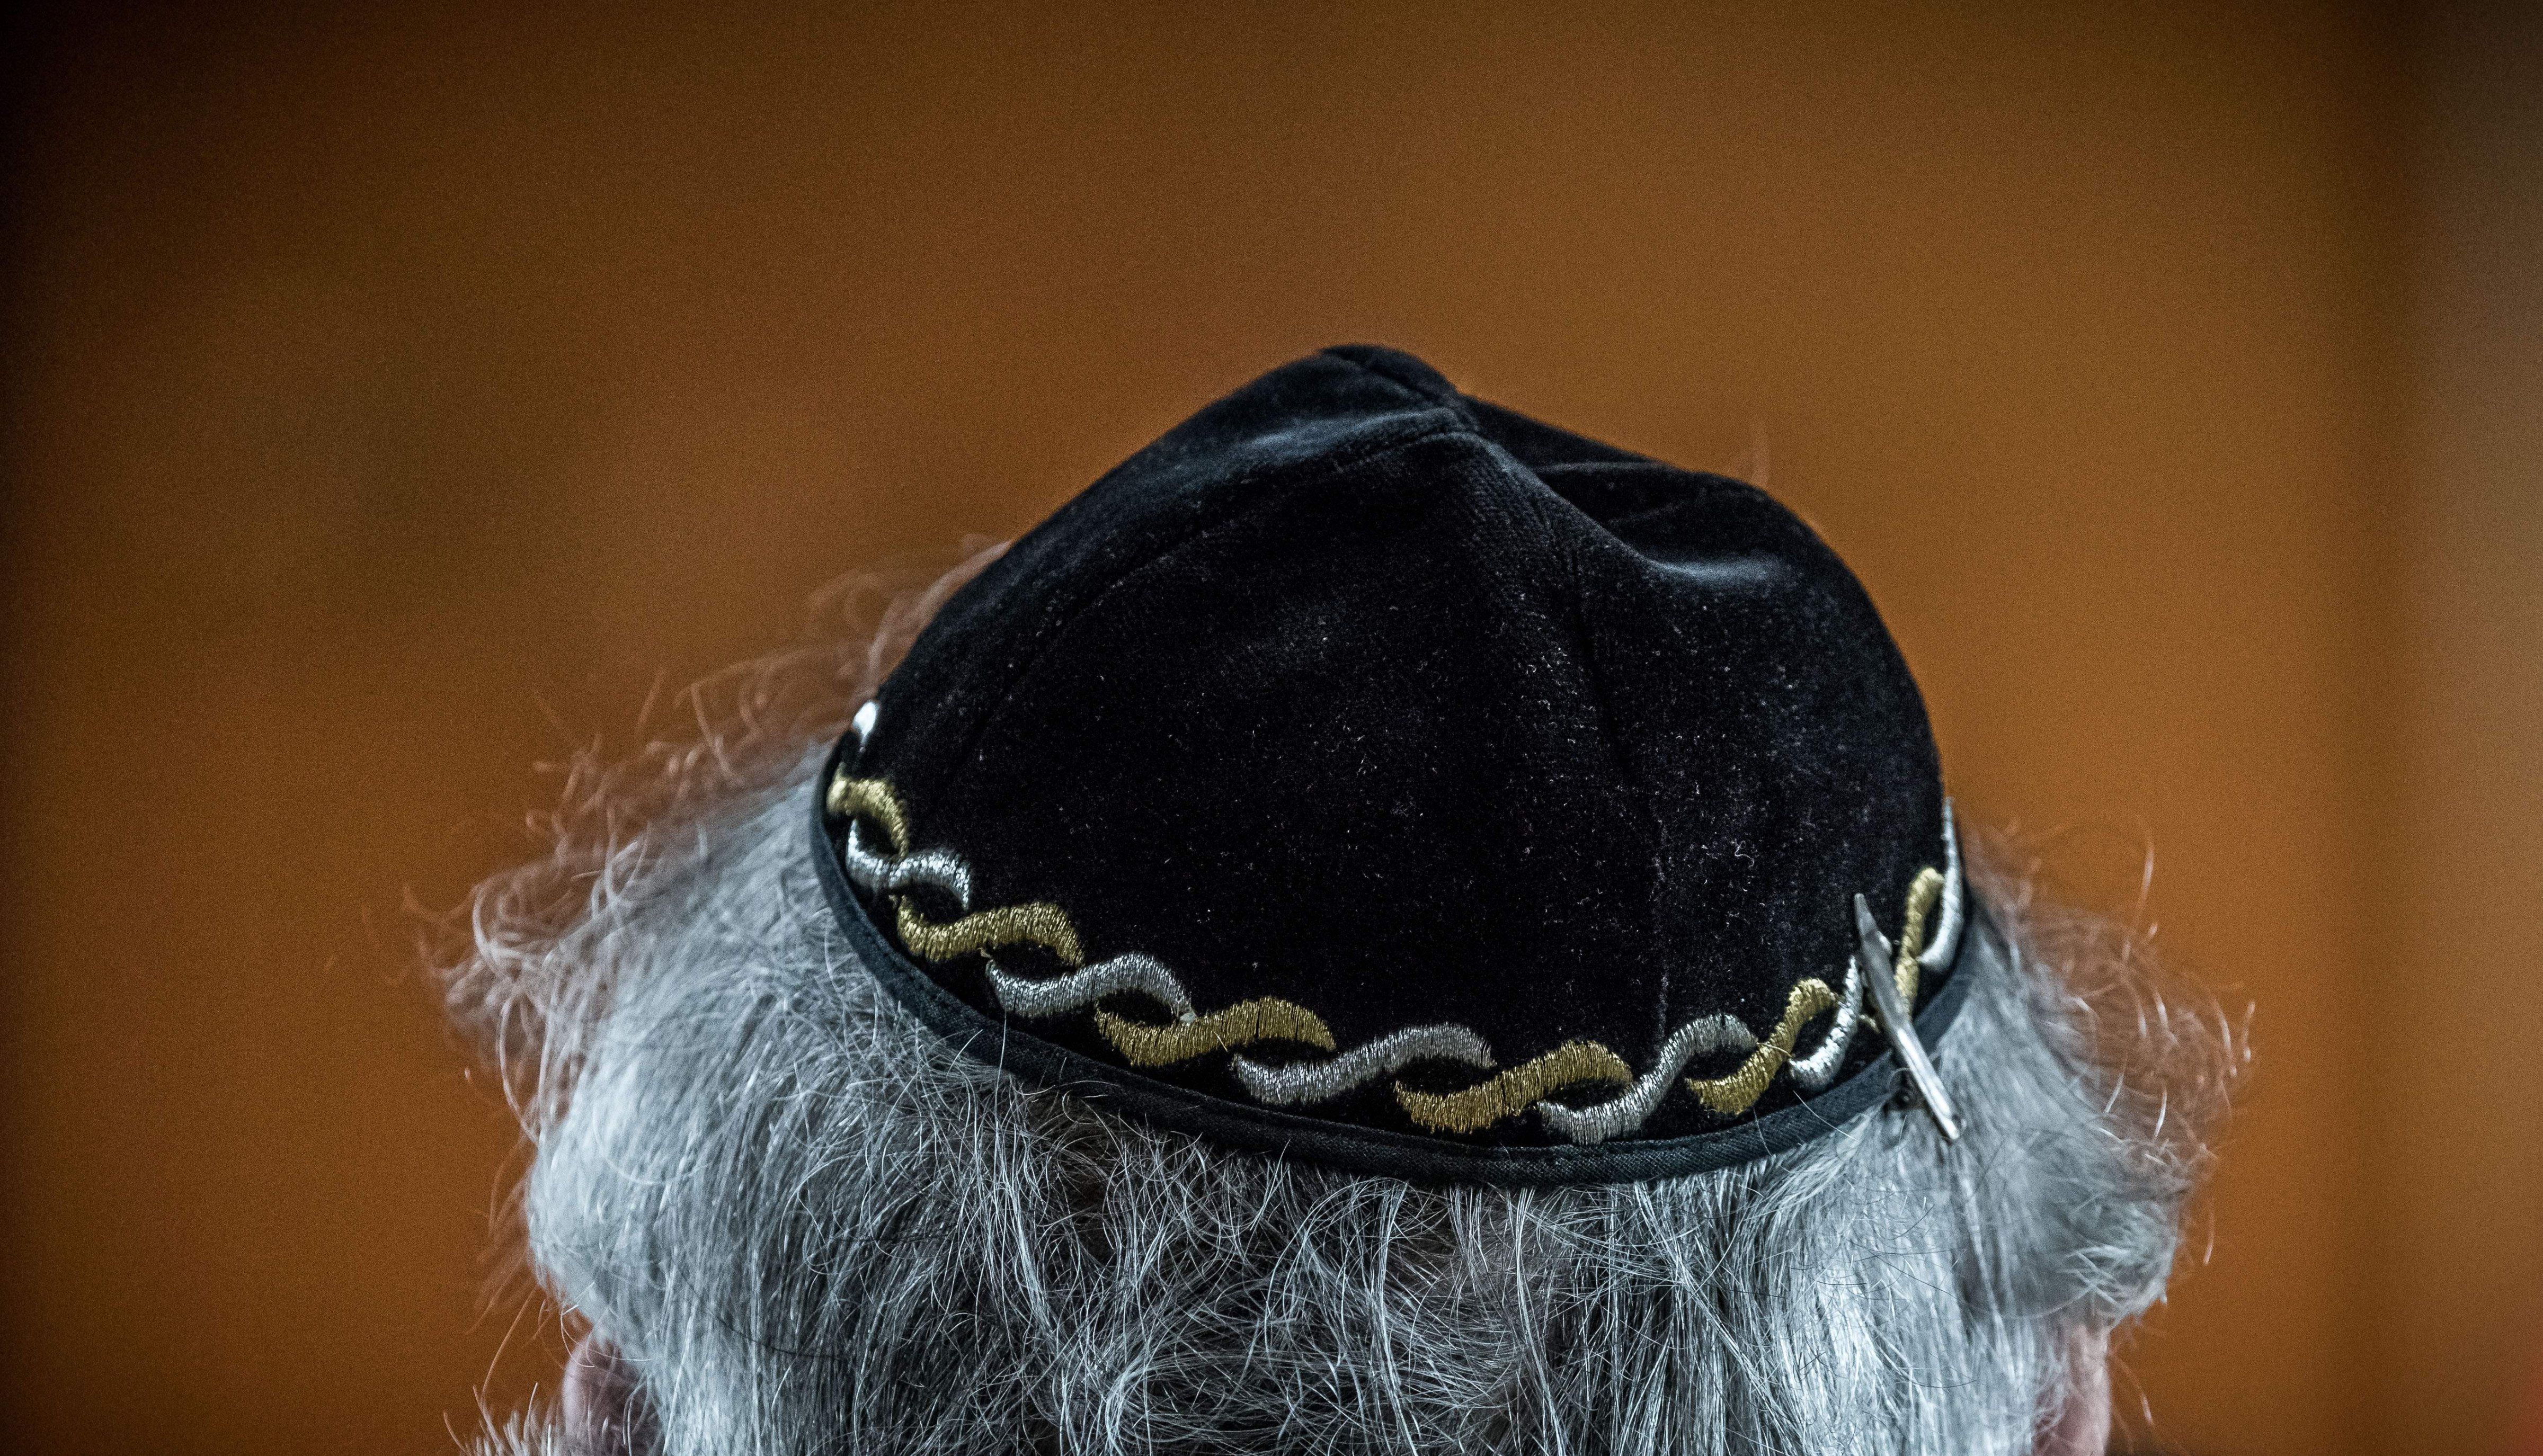 A Jewish man wears a kippa, or Jewish religious skull cap, during a meeting on "the German and French perspectives on immigration, integration and identity" organized by the American Jewish Committee (AJC) in Berlin on April 24, 2018. (Michael Kappeler—AFP/Getty Images)